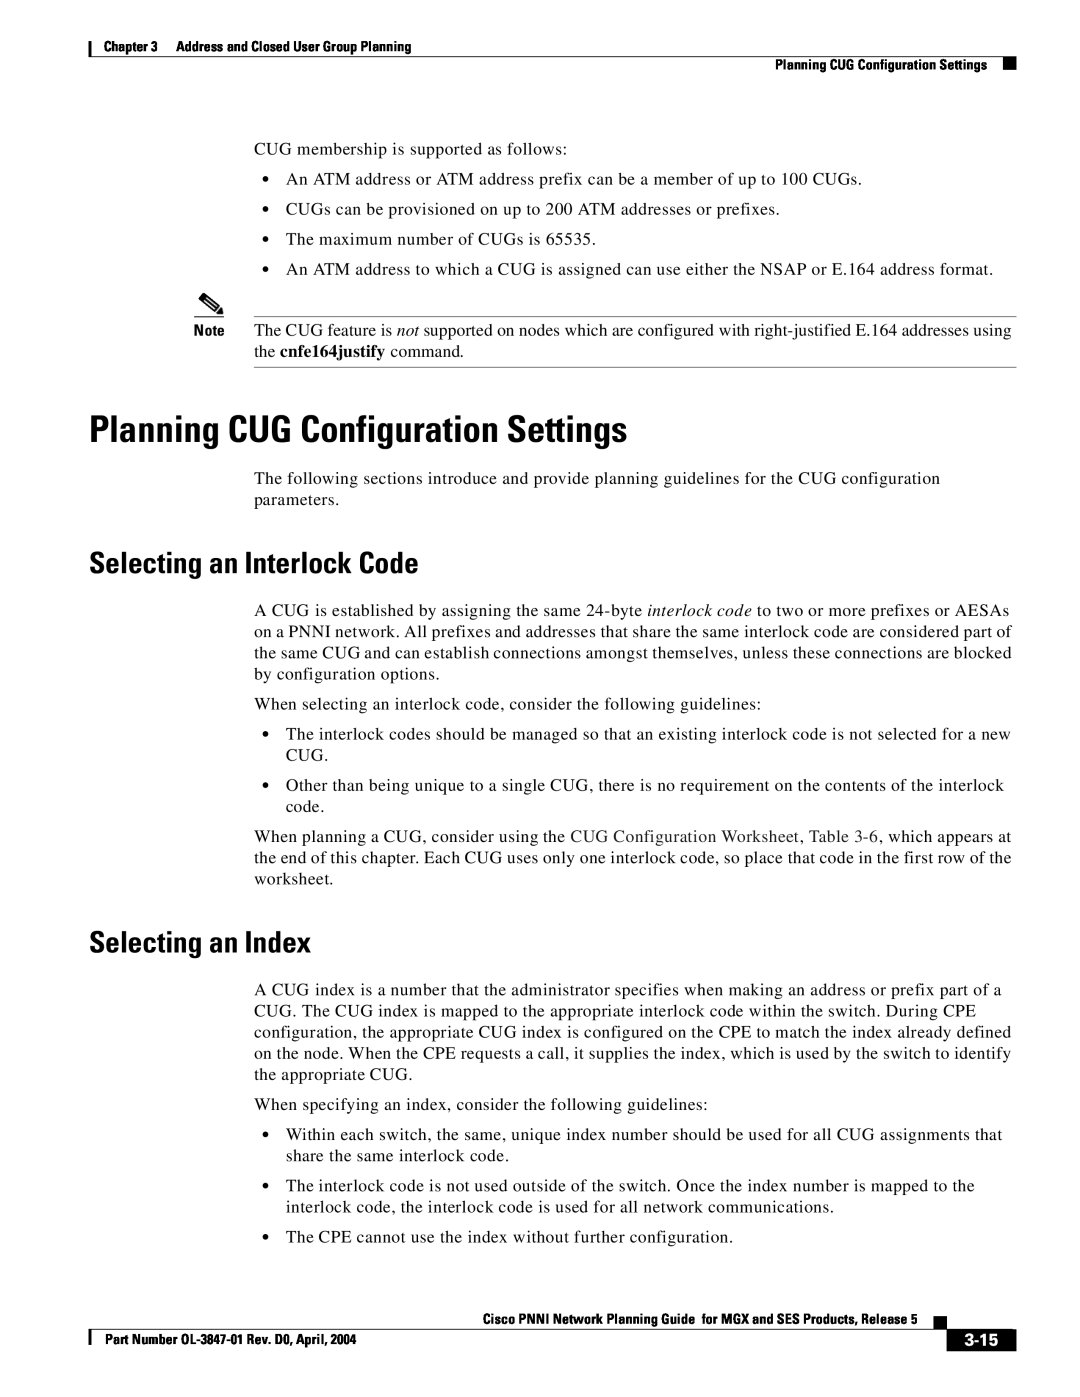 Cisco Systems Network Router Planning CUG Configuration Settings, Selecting an Interlock Code, Selecting an Index, 3-15 